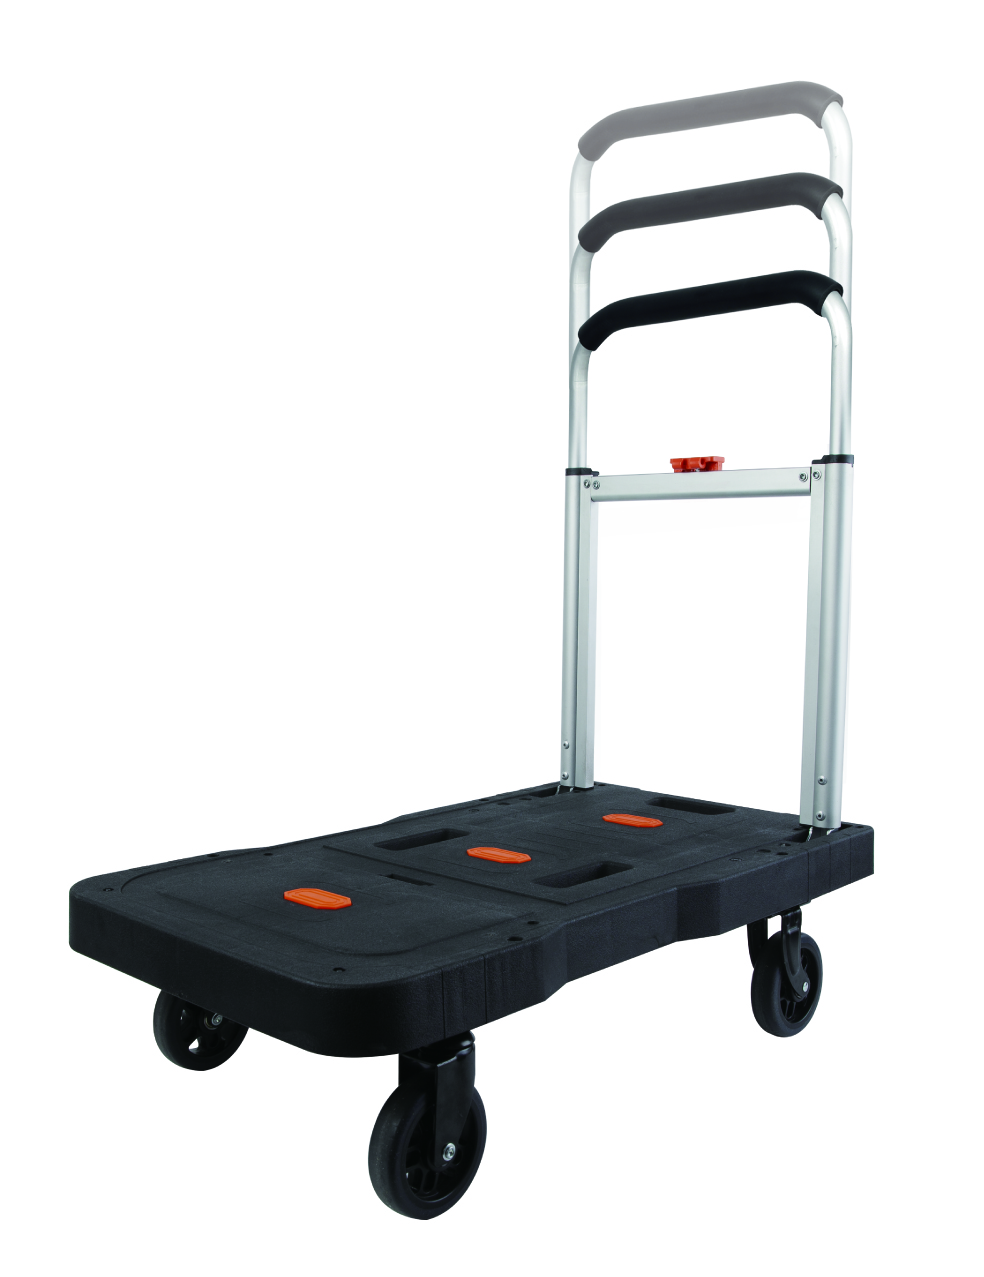 What are the characteristics of Folding hand trolley?